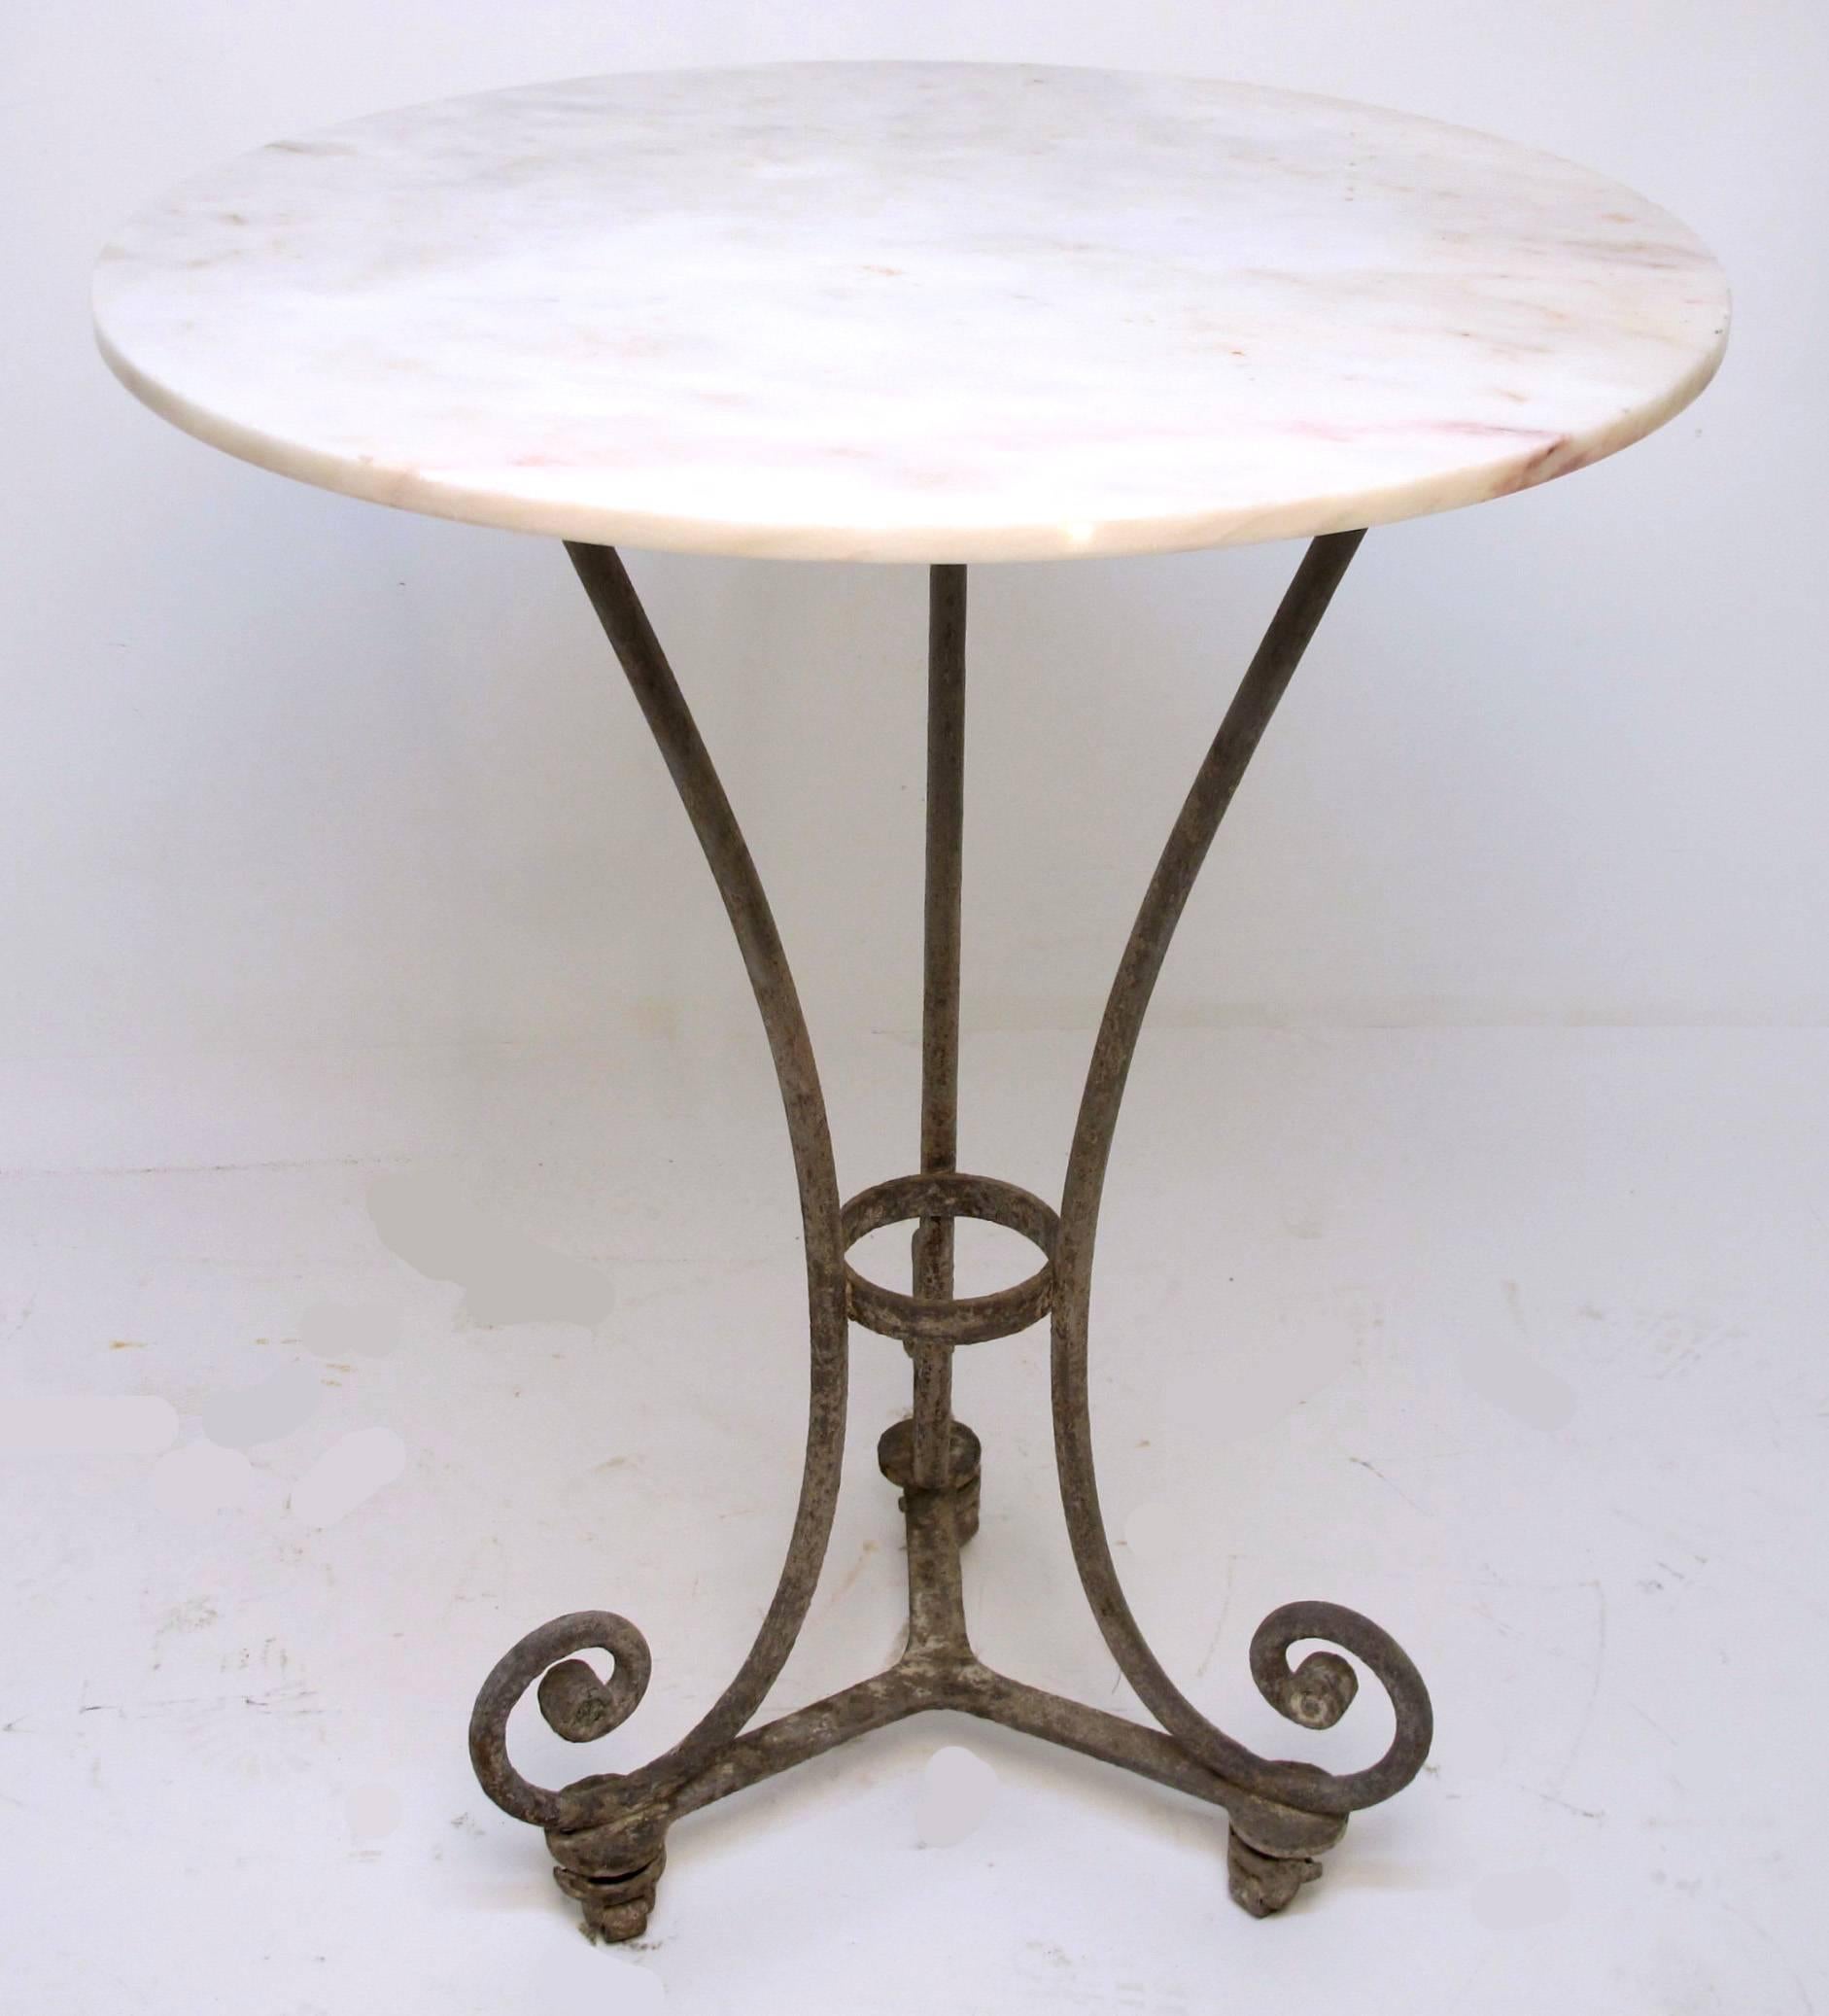 An unusually tall cafe table with marble top, having a beautifully weathered and patinated iron base. French, late 19th century.